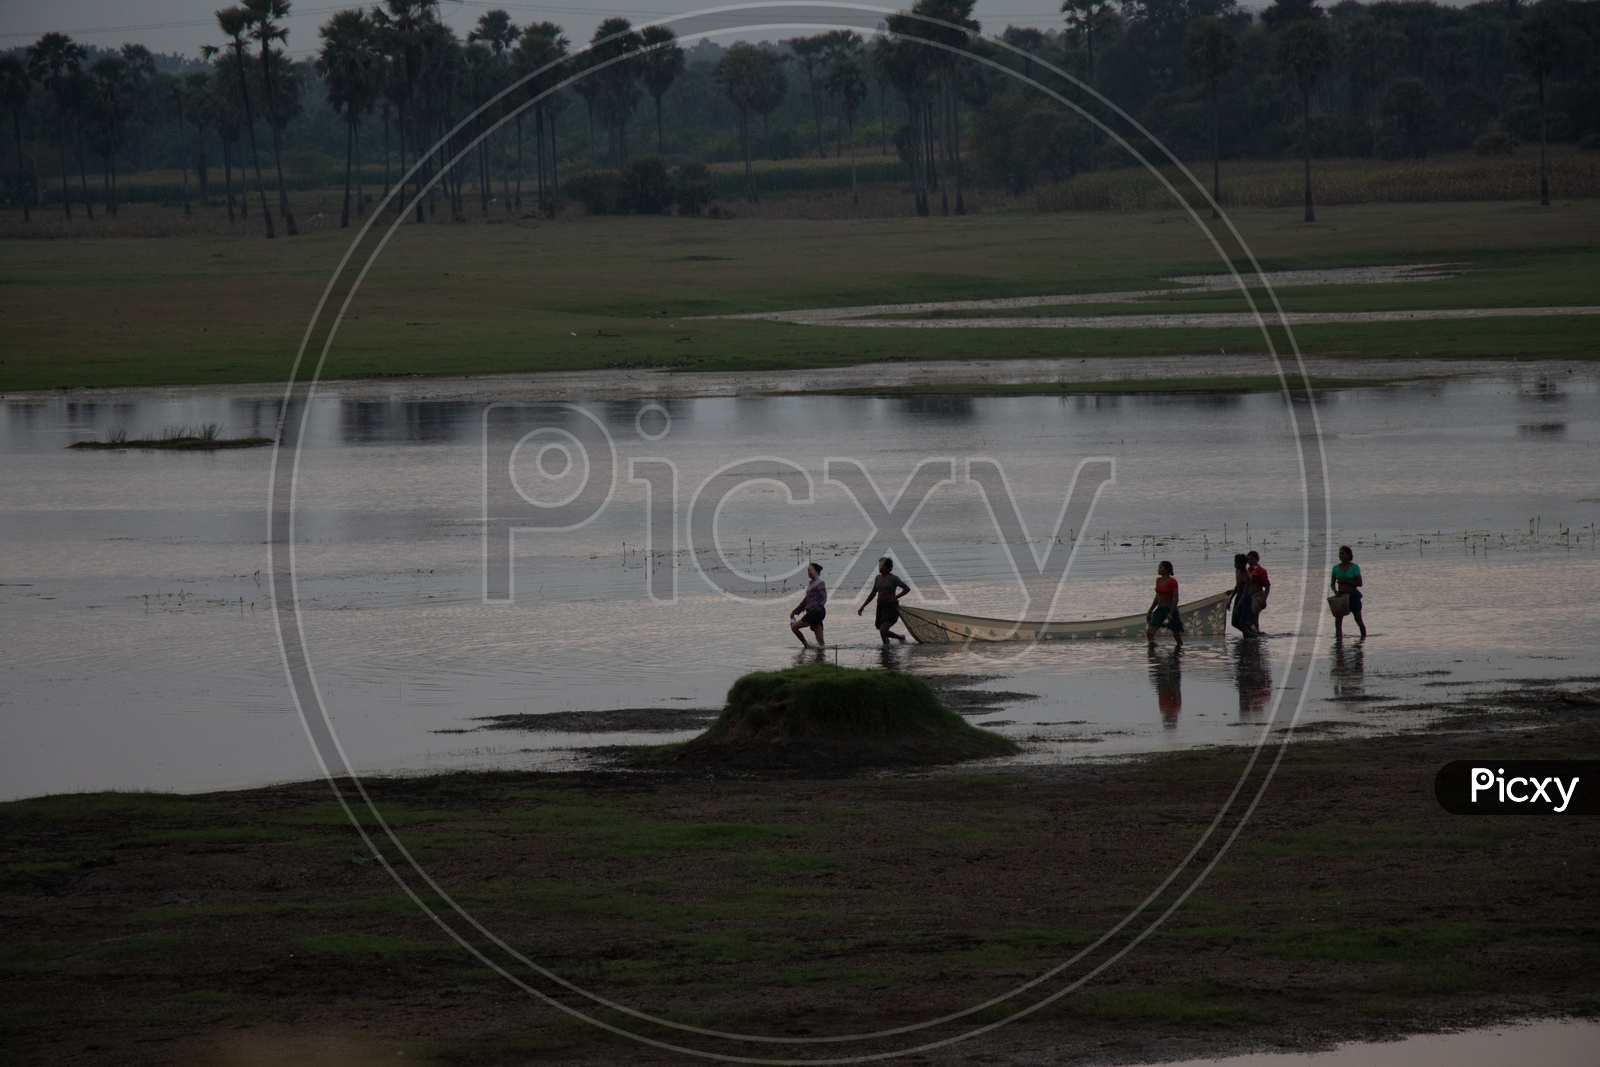 Woman Fishing In a Lake With Their Sarees